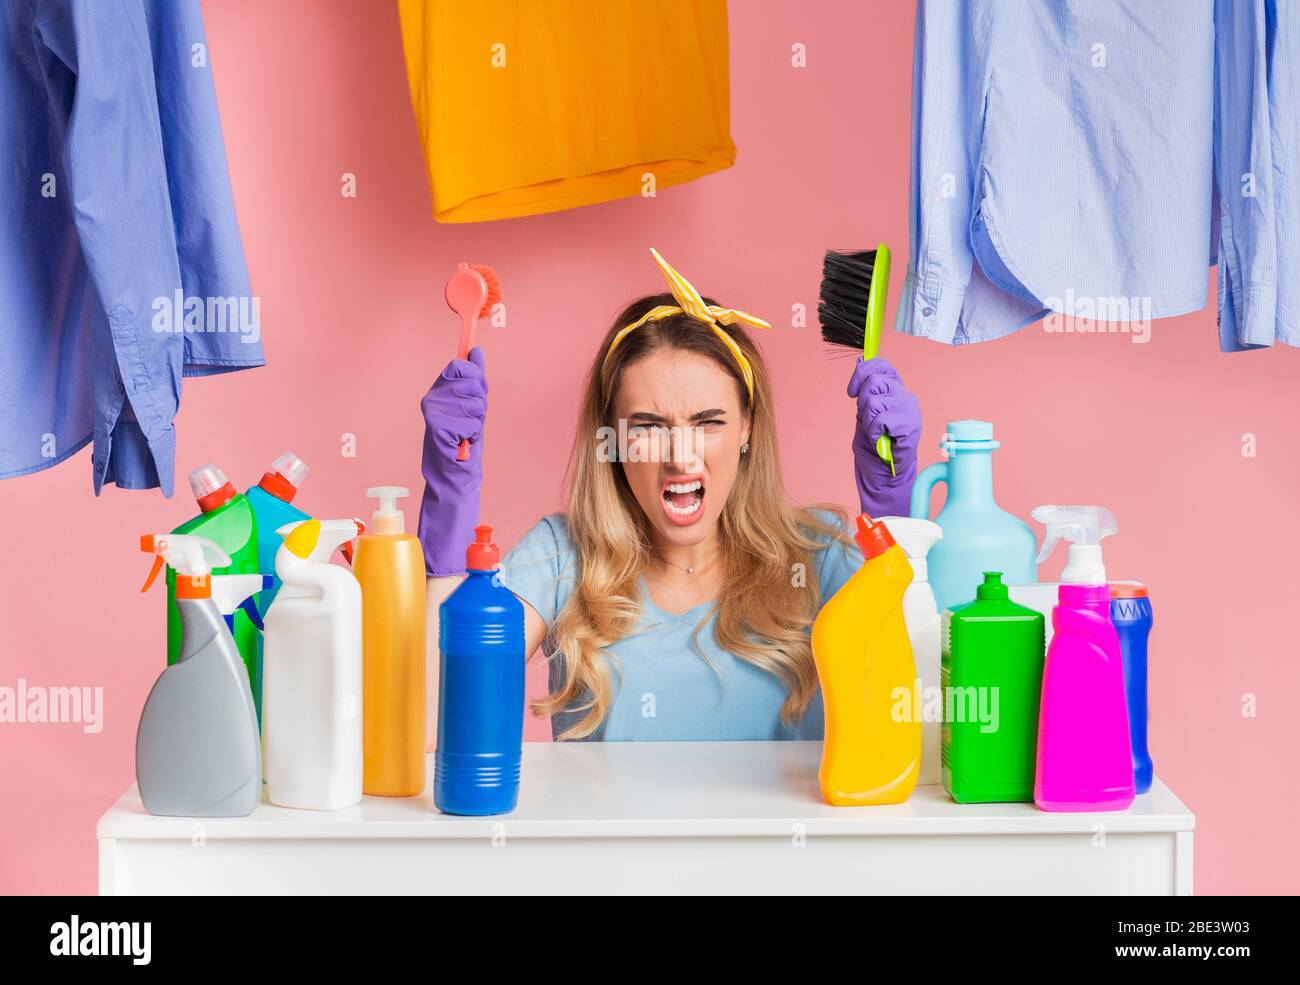 Housewife screams and holds brushes in hands Stock Photo